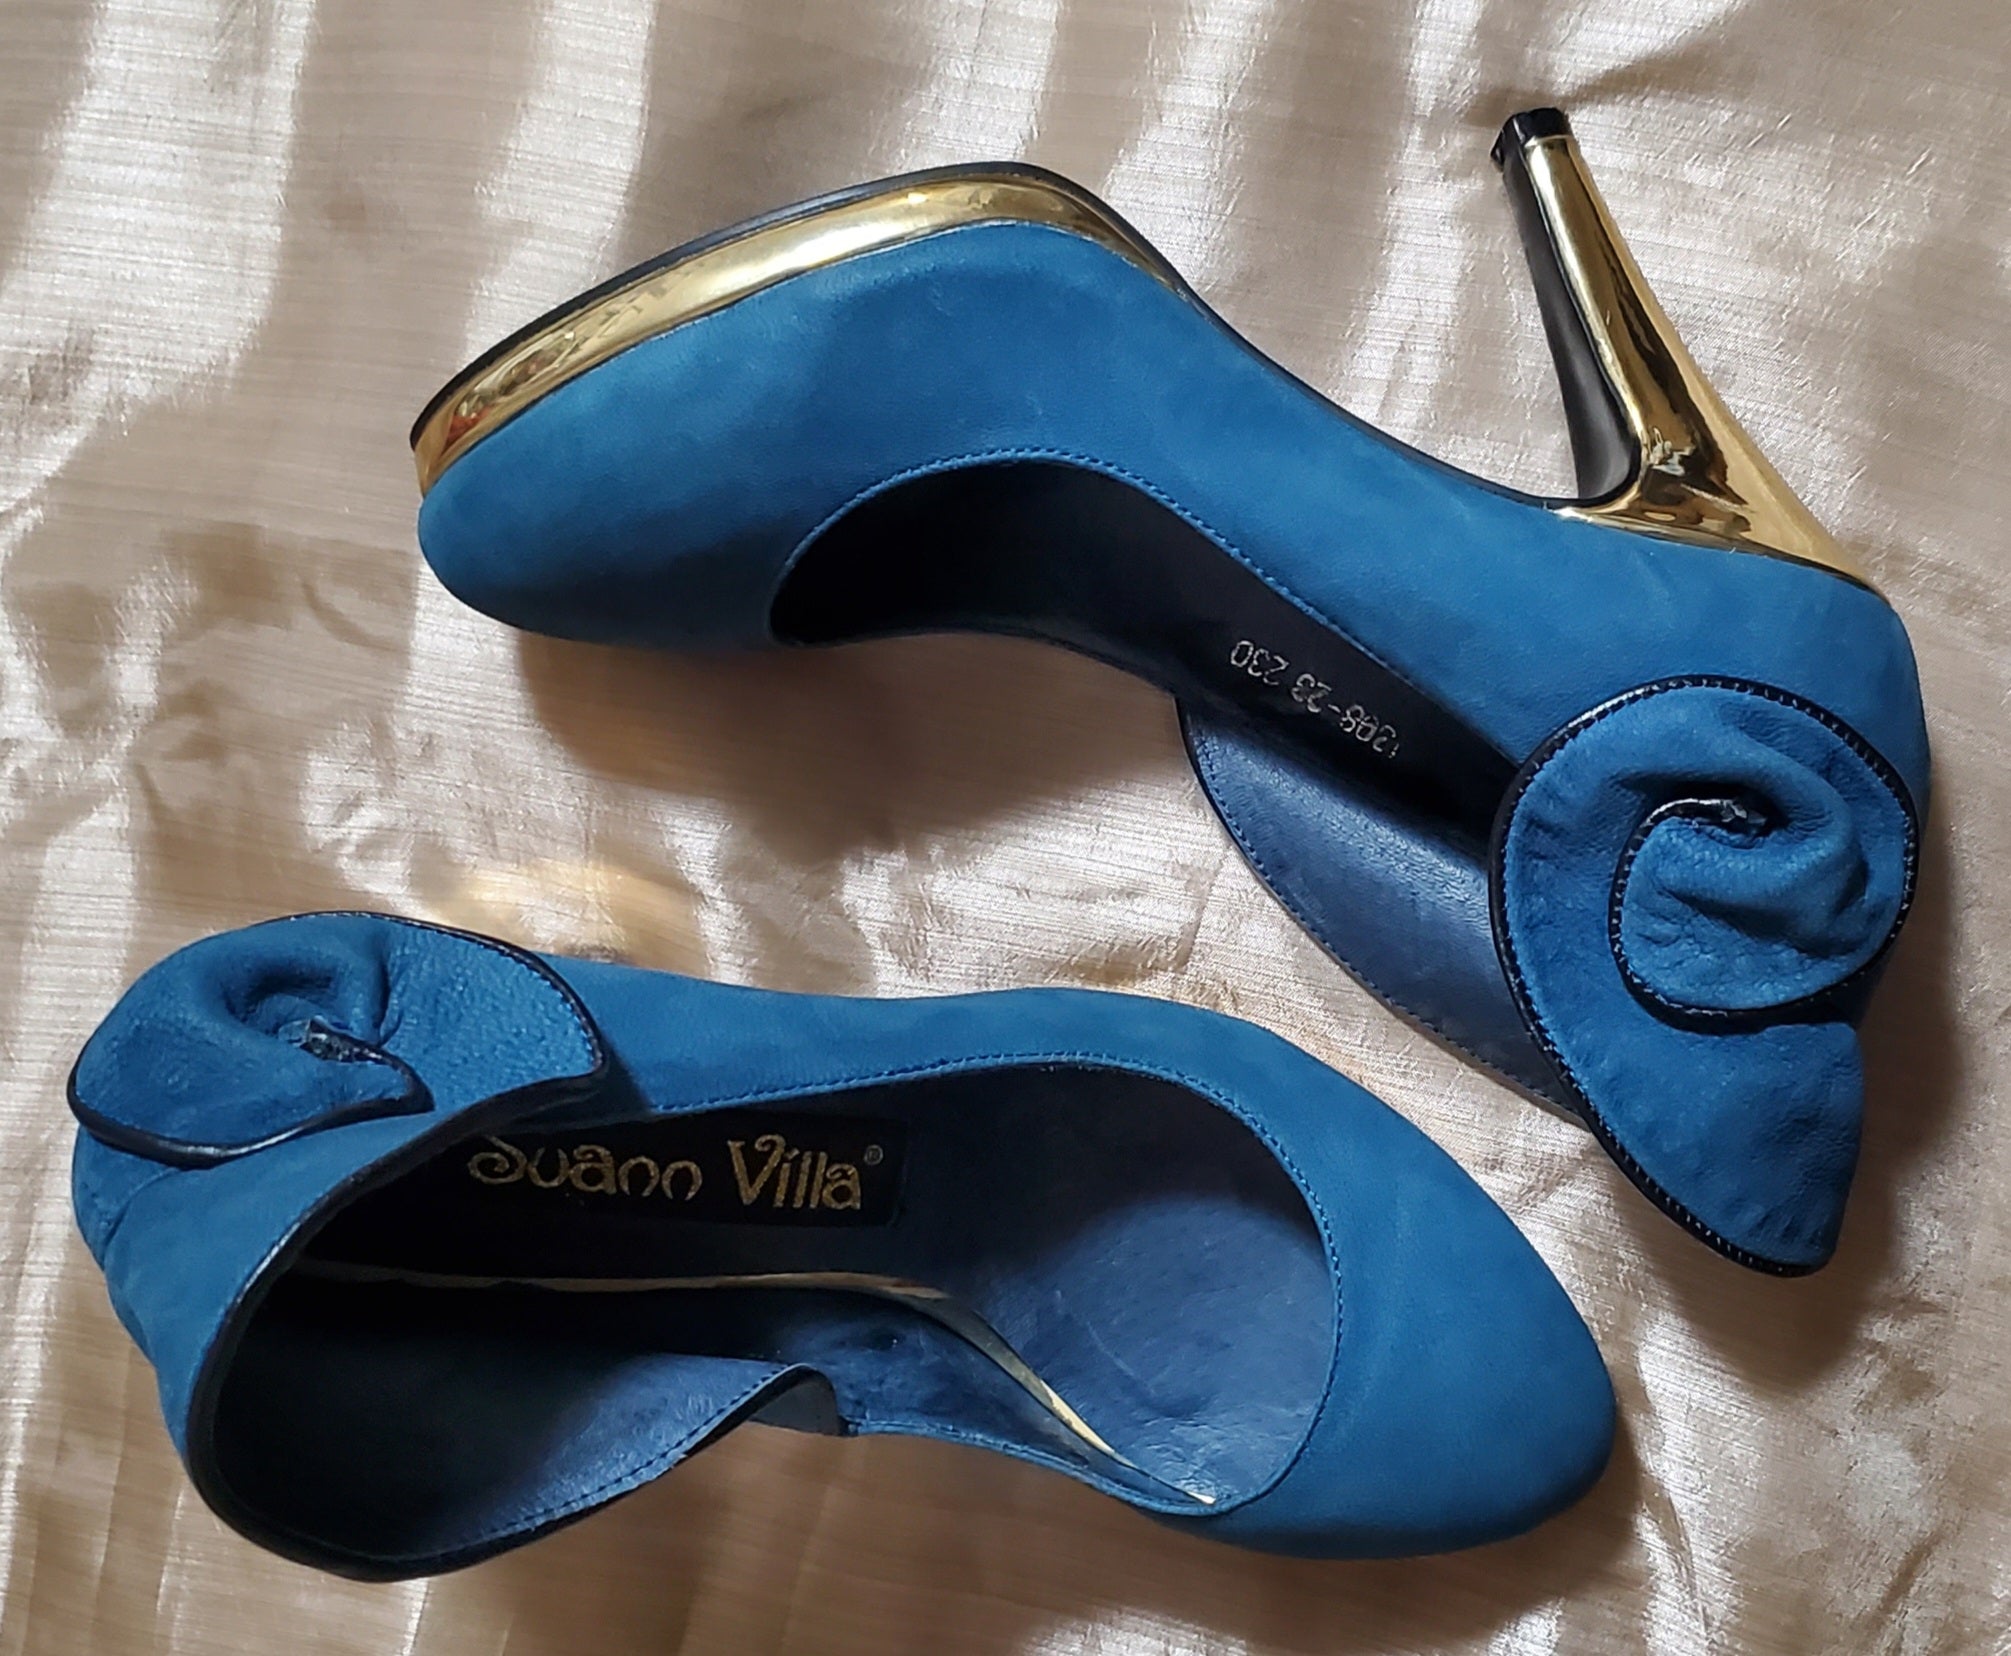 Top view of Suann Villa blue and gold leather pumps with ruffle details